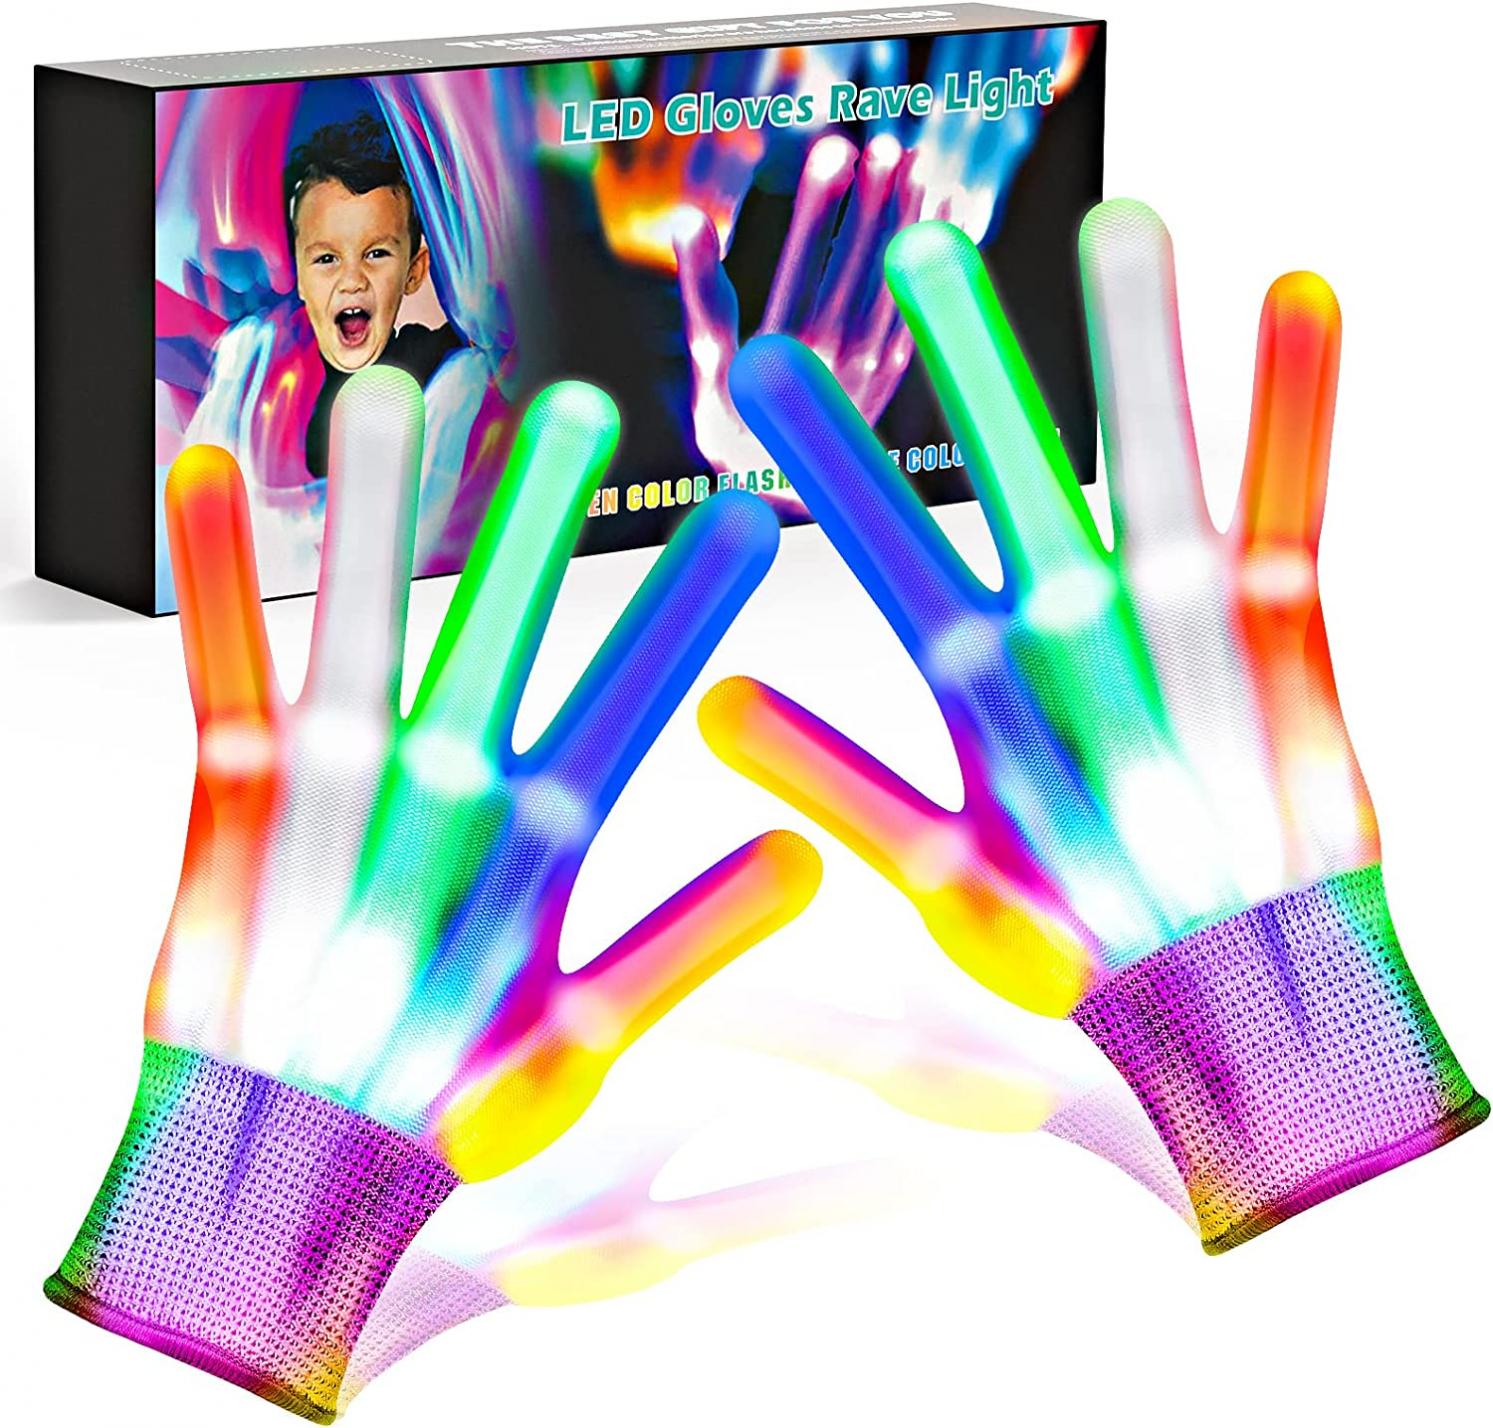 Cool Toys LED Gloves,Boy Toys Age 8-10 Years Old with 6 Flash Mode, Stocking Stuffers for Halloween Christmas Birthday Parties, Fun Toys Gift for 3 4 5 6 7 8 9 10 11 12 Year Old Girls Boys(1 Pair)